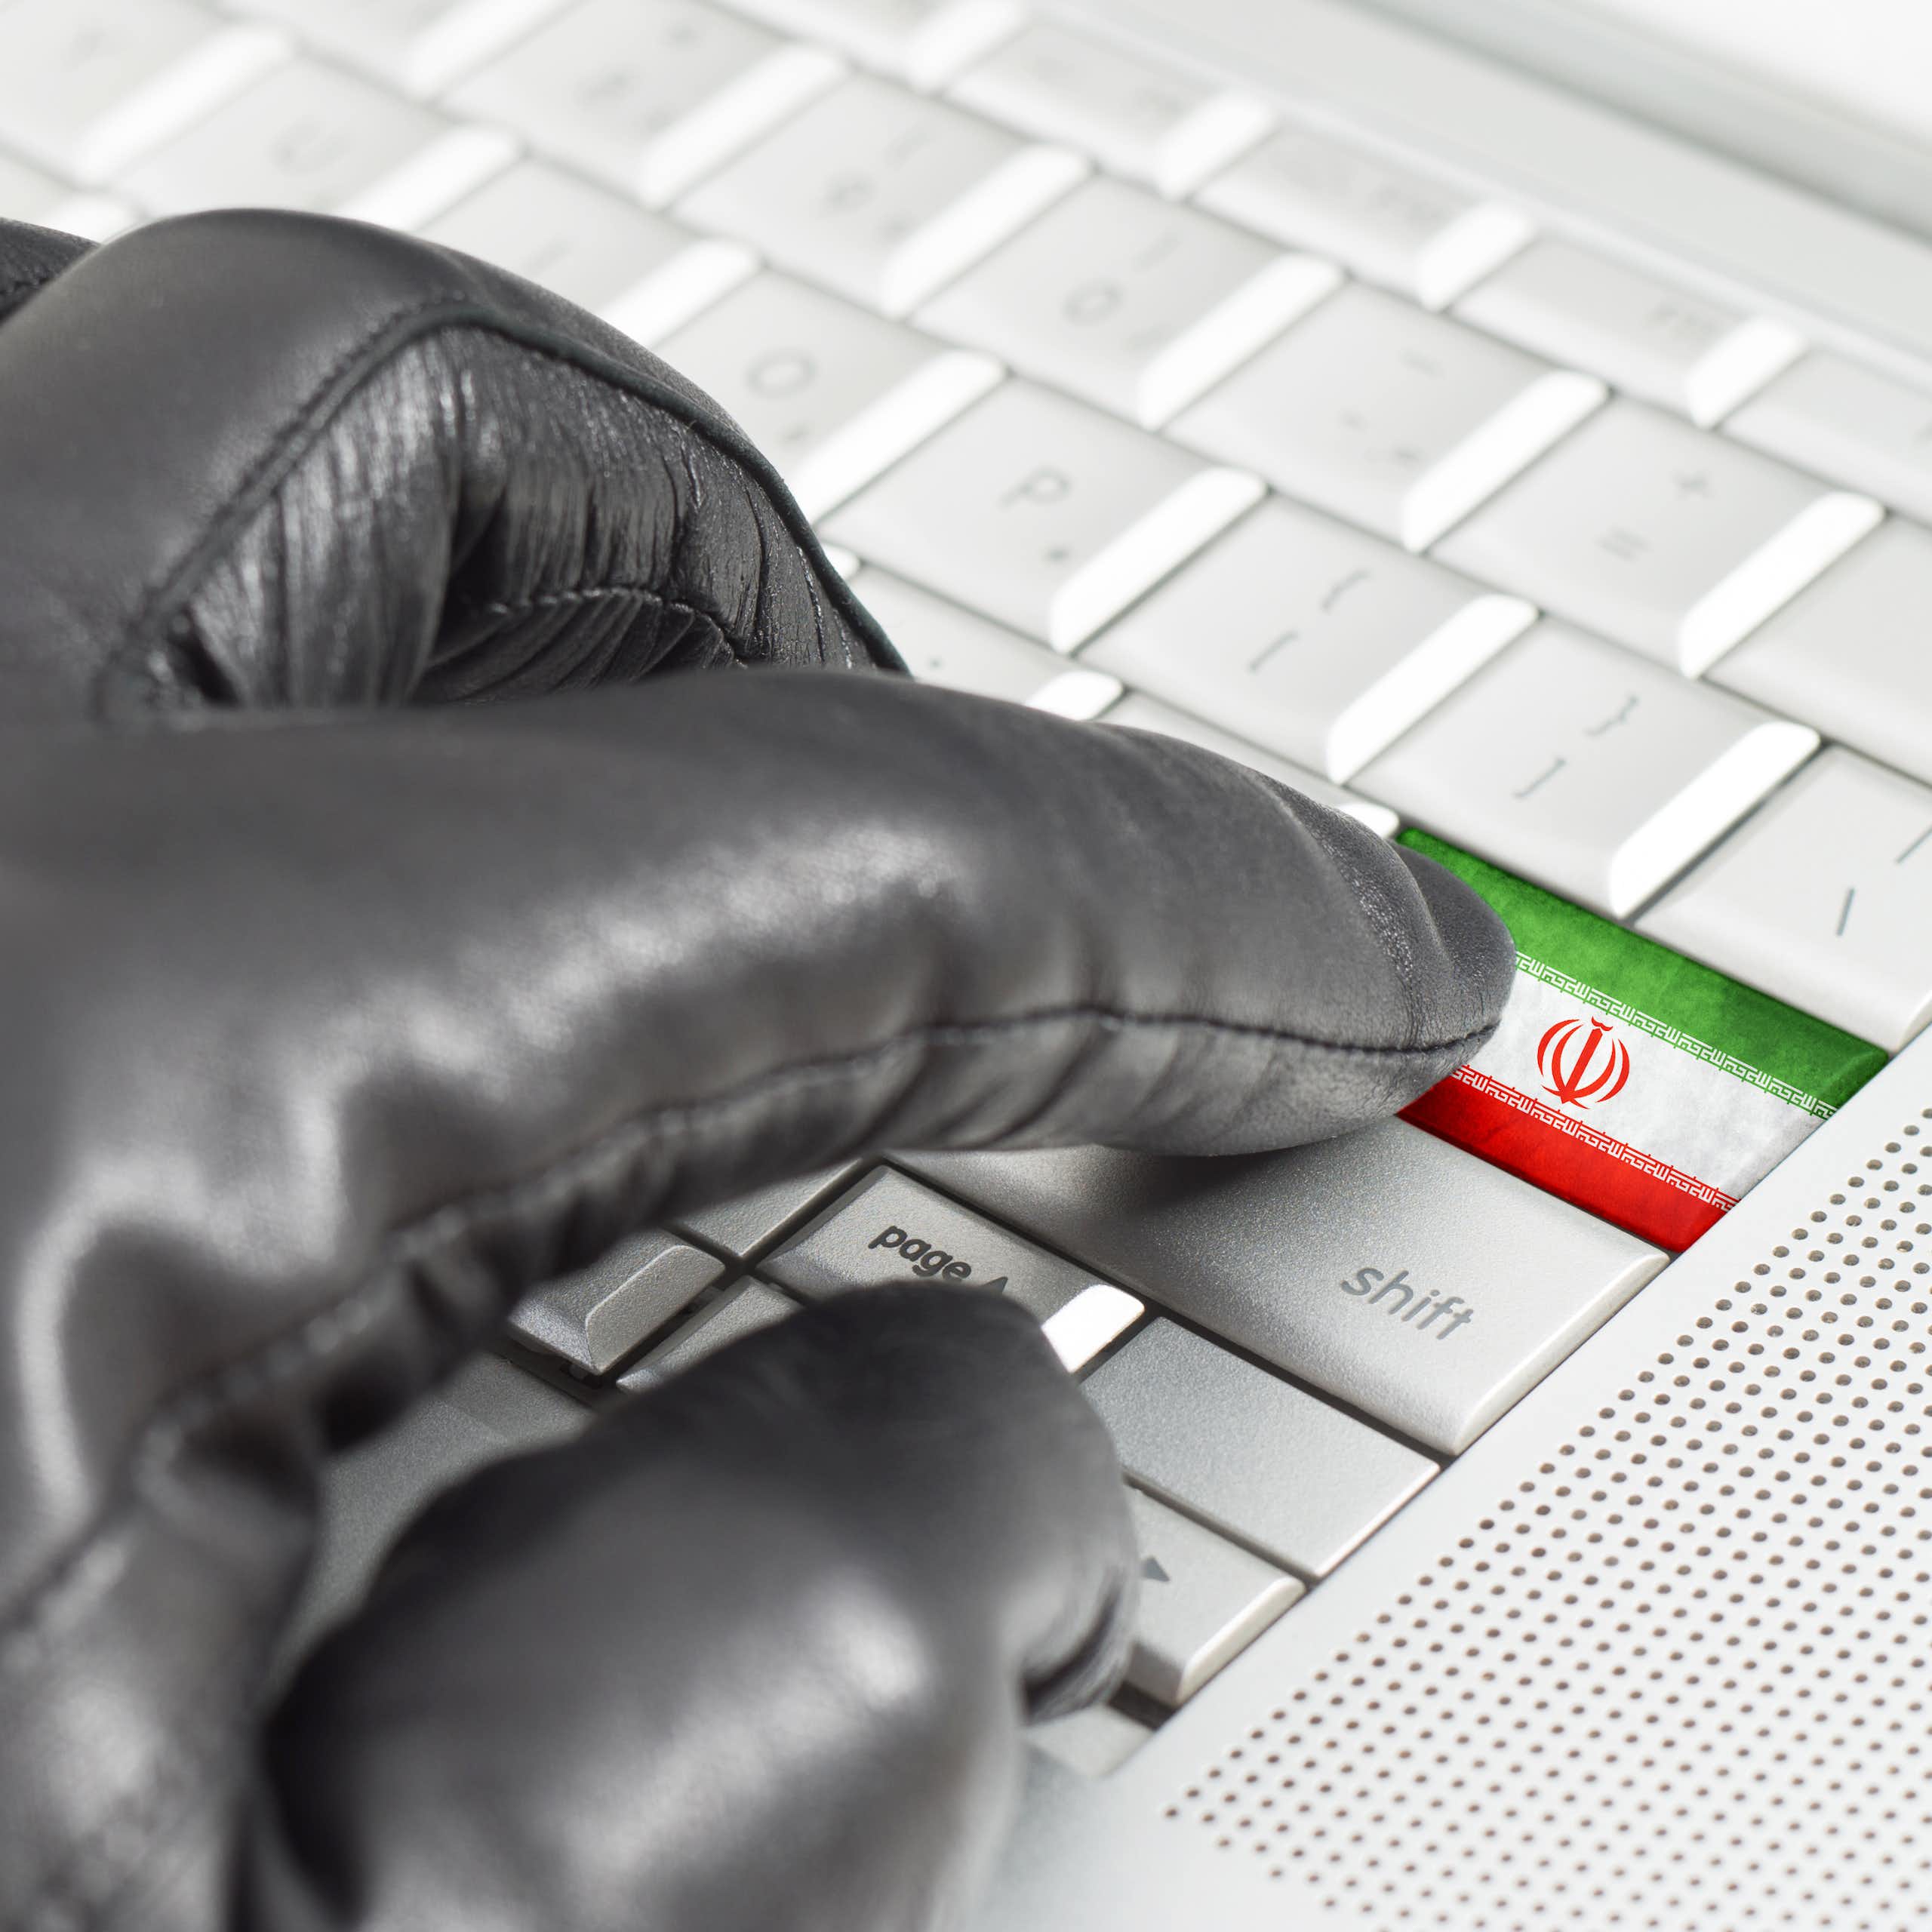 A hand in a glove presses a button on a keyboard decorated with the Iranian flag.